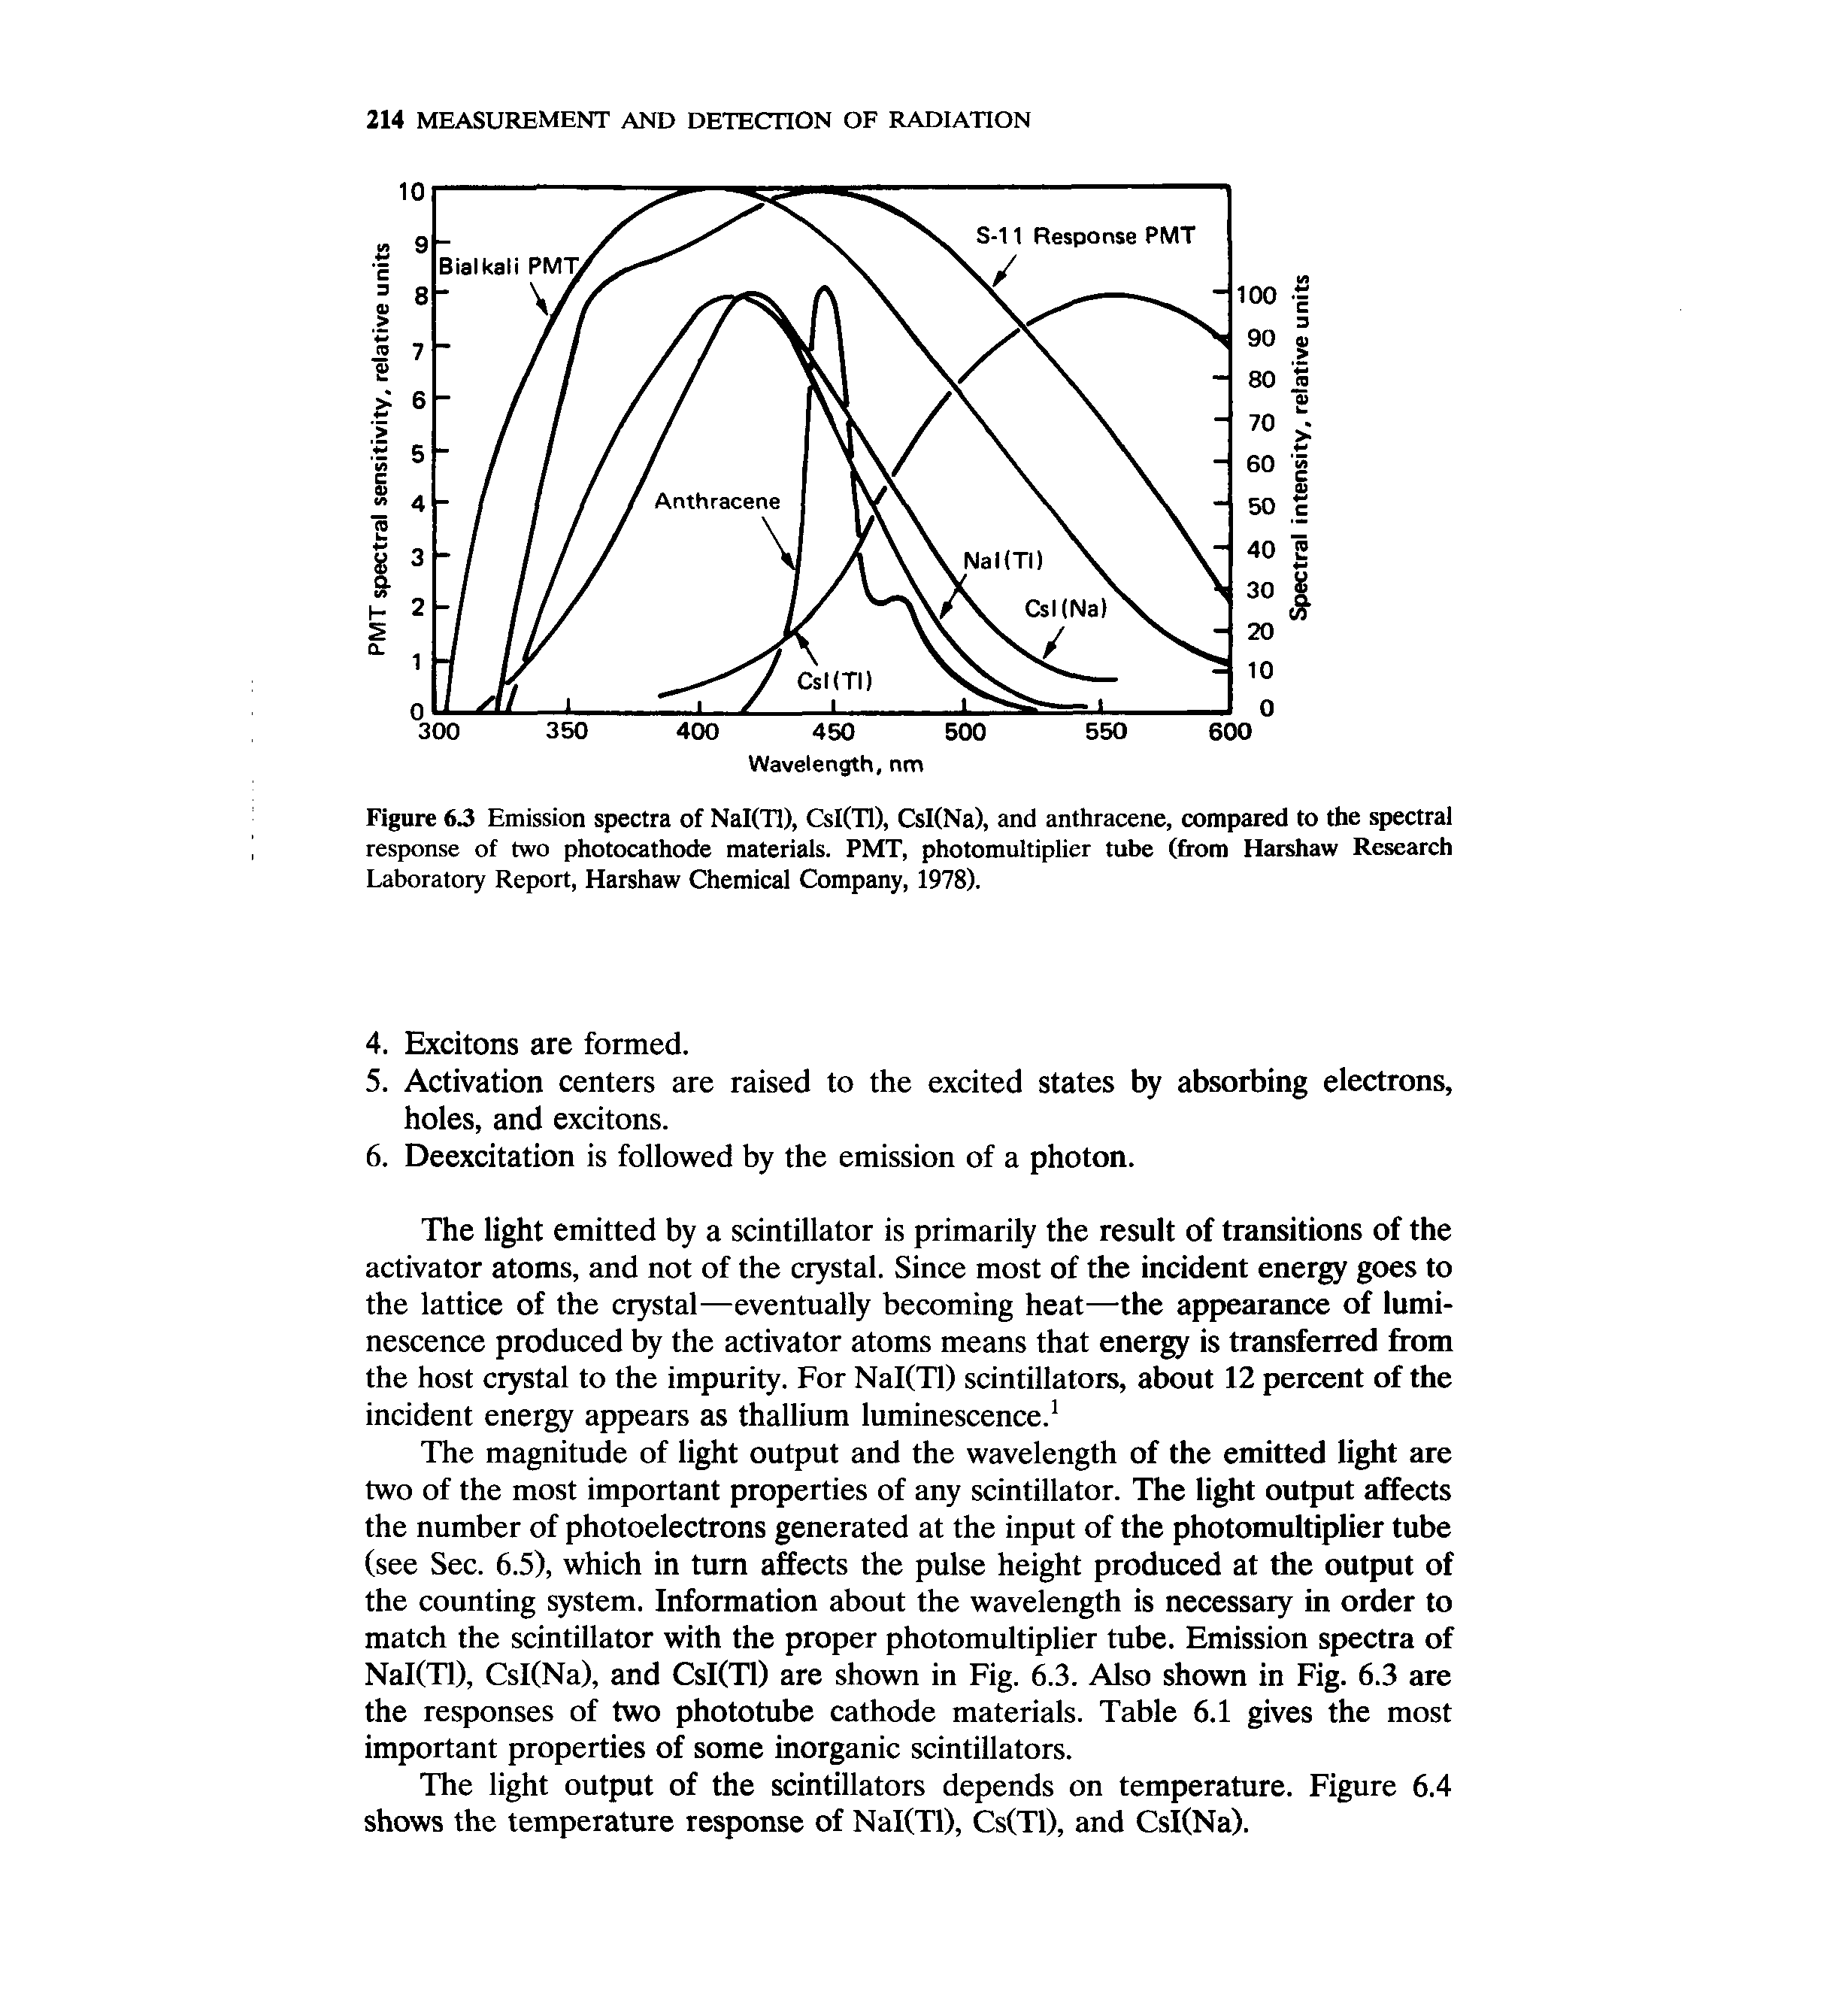 Figure 63 Emission spectra of Nal(Tl), CsI(Tl), CsI(Na), and anthracene, compared to the spectral response of two photocathode materials. PMT, photomultiplier tube (from Harshaw Research Laboratory Report, Harshaw Chemical Company, 1978).